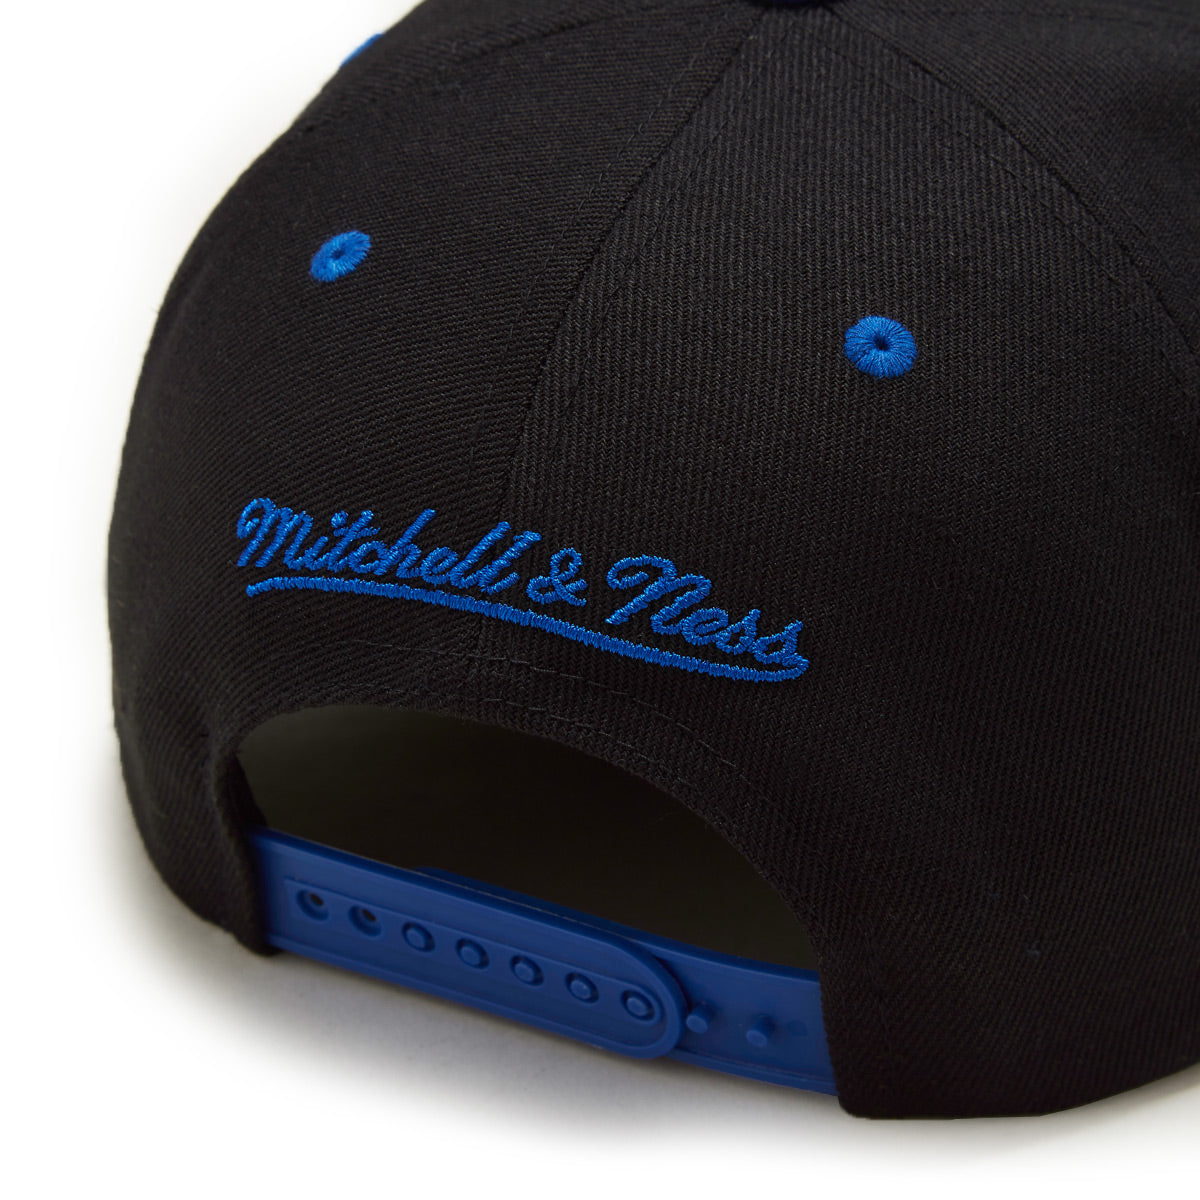 CCS x Mitchell & Ness Hoops Hat - Black/Royal image 5